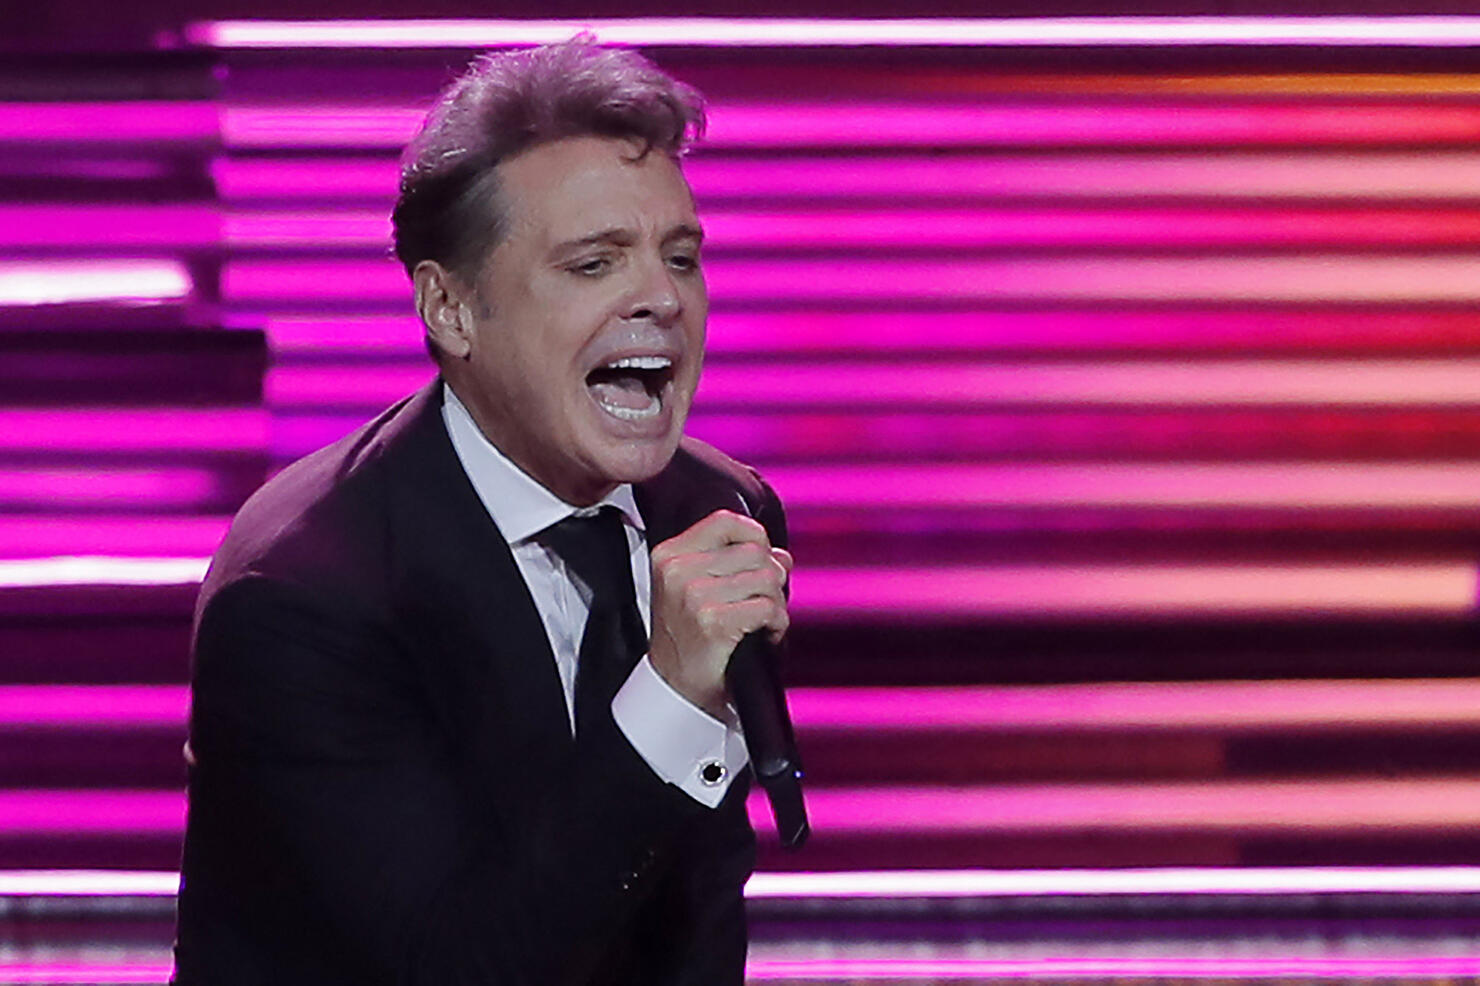 CHILE-MUSIC-LUIS MIGUEL